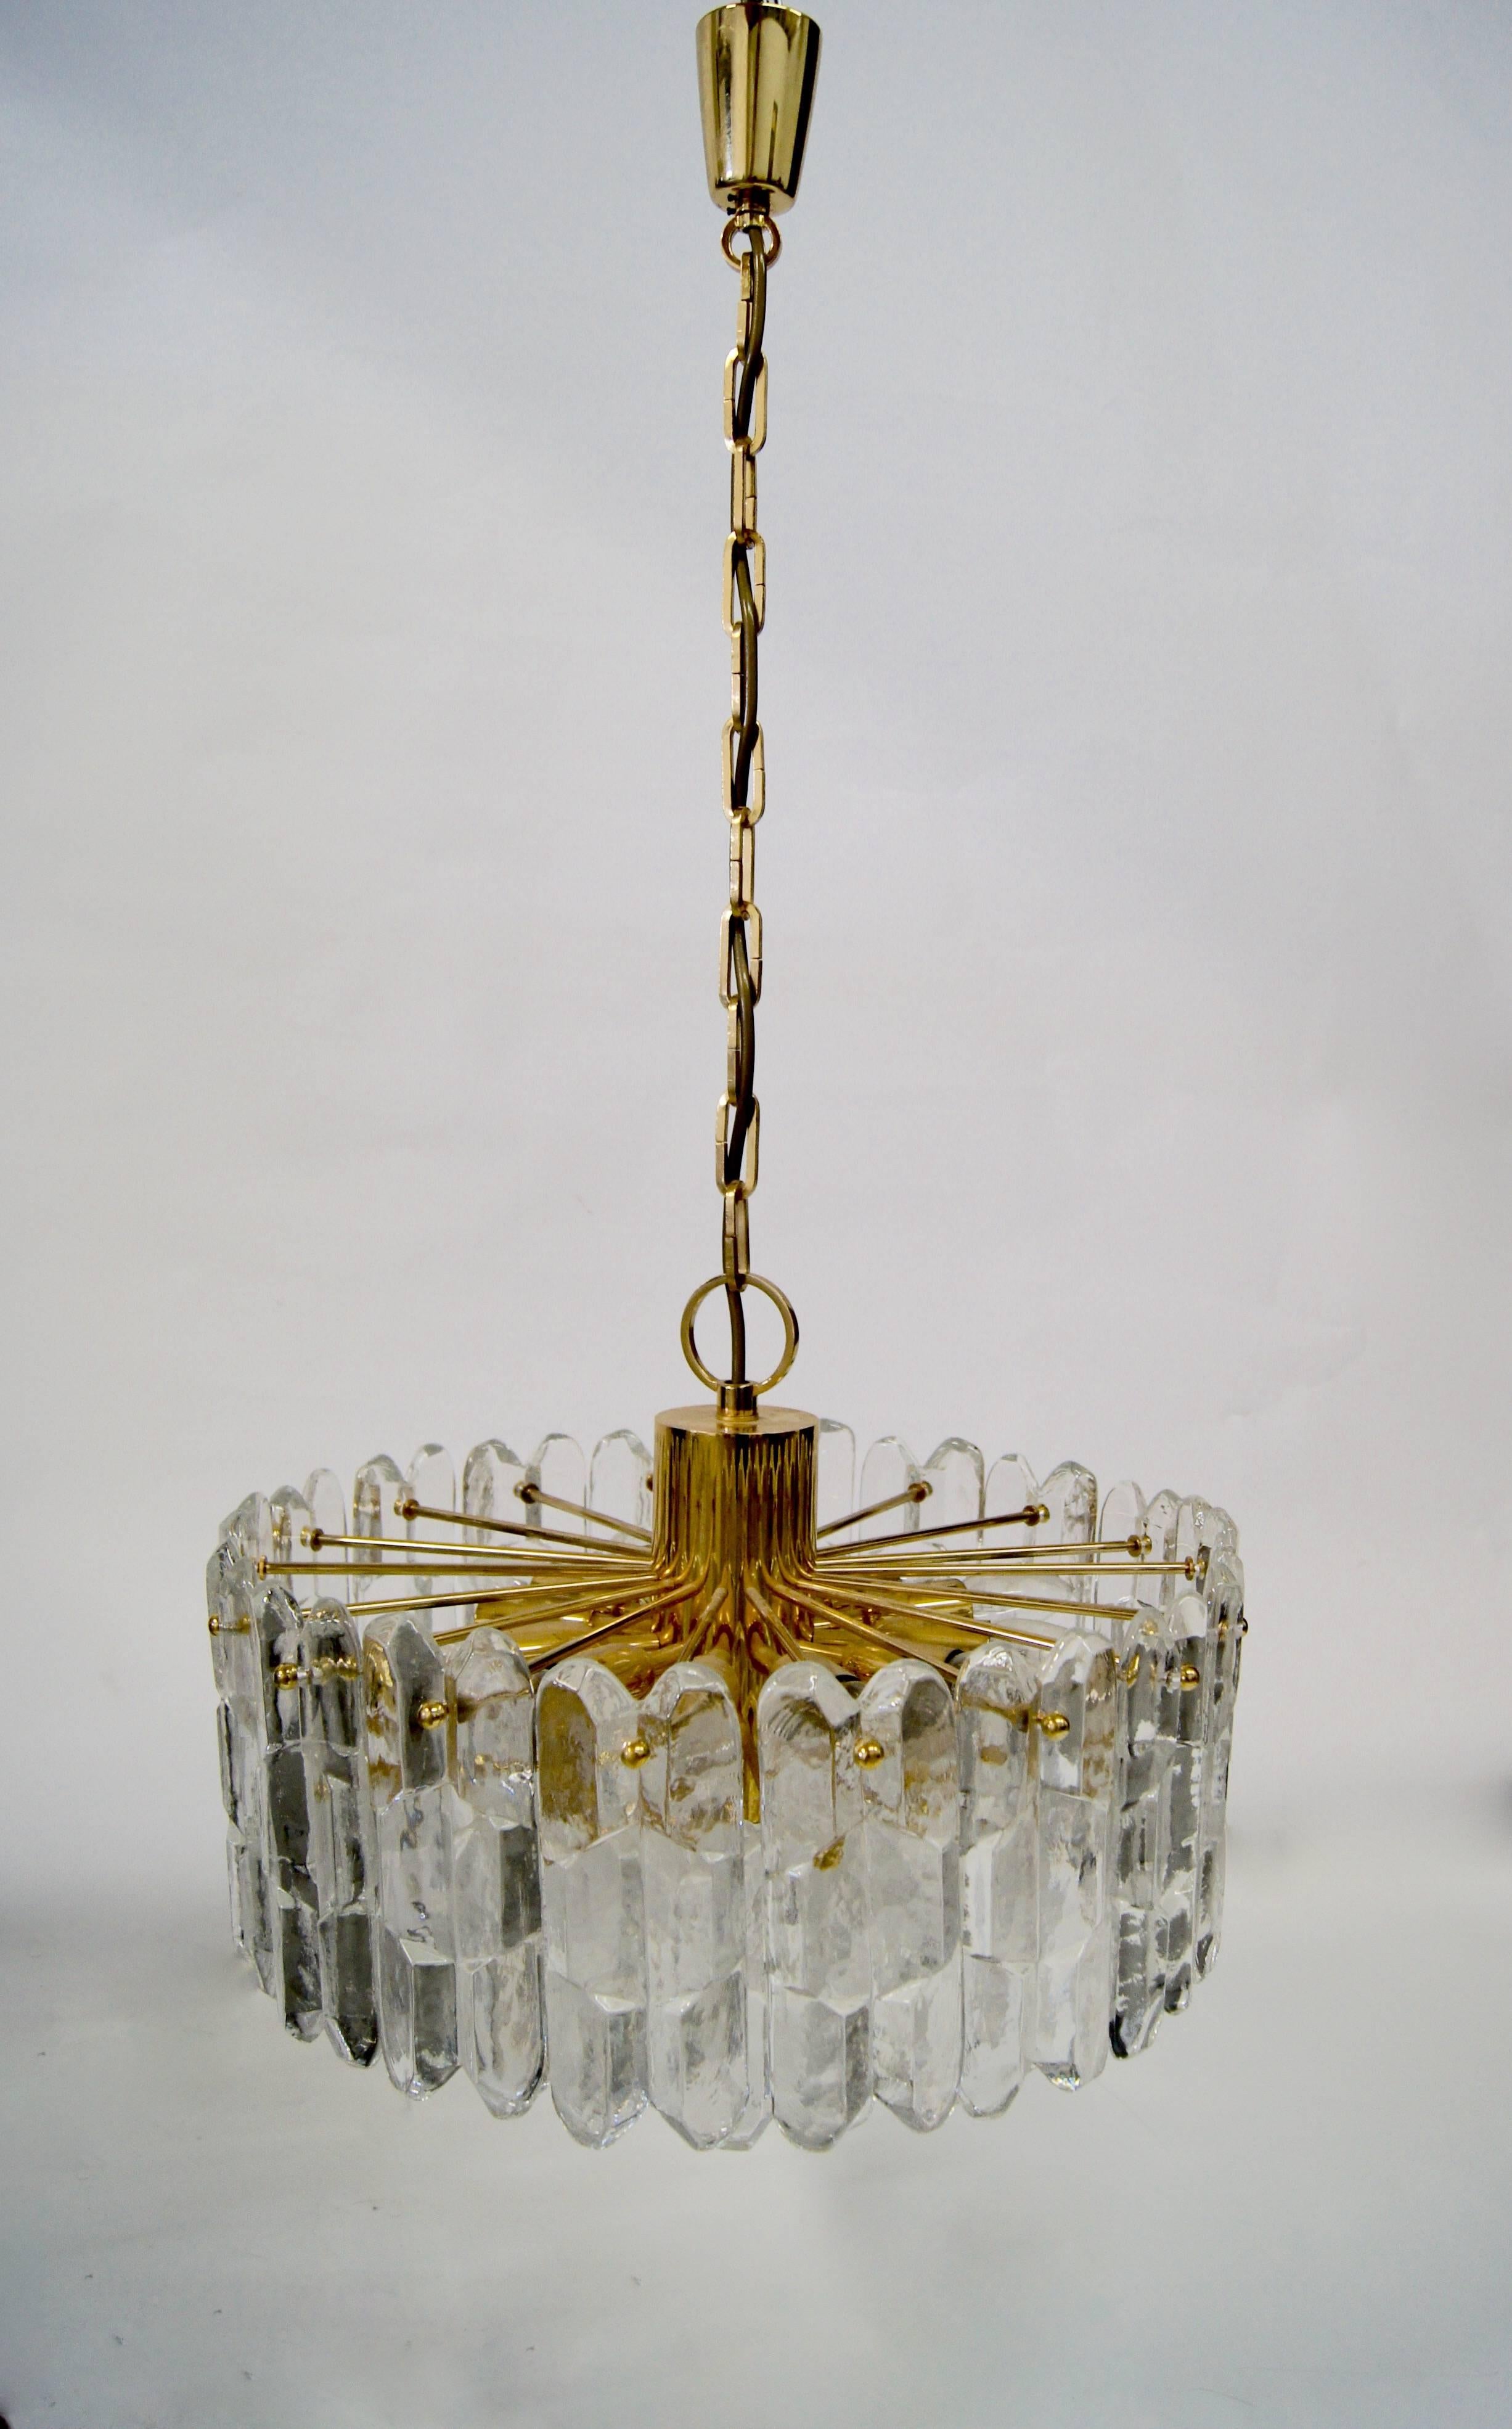 This Articulate chandelier named Palazzo is decorated with thick ‘ice glass’ cut crystals on a 24-carat gold plated brass frame. Twelve small base bulbs are neatly arranged on the top of the pendant and one in the centre at the bottom of this triple